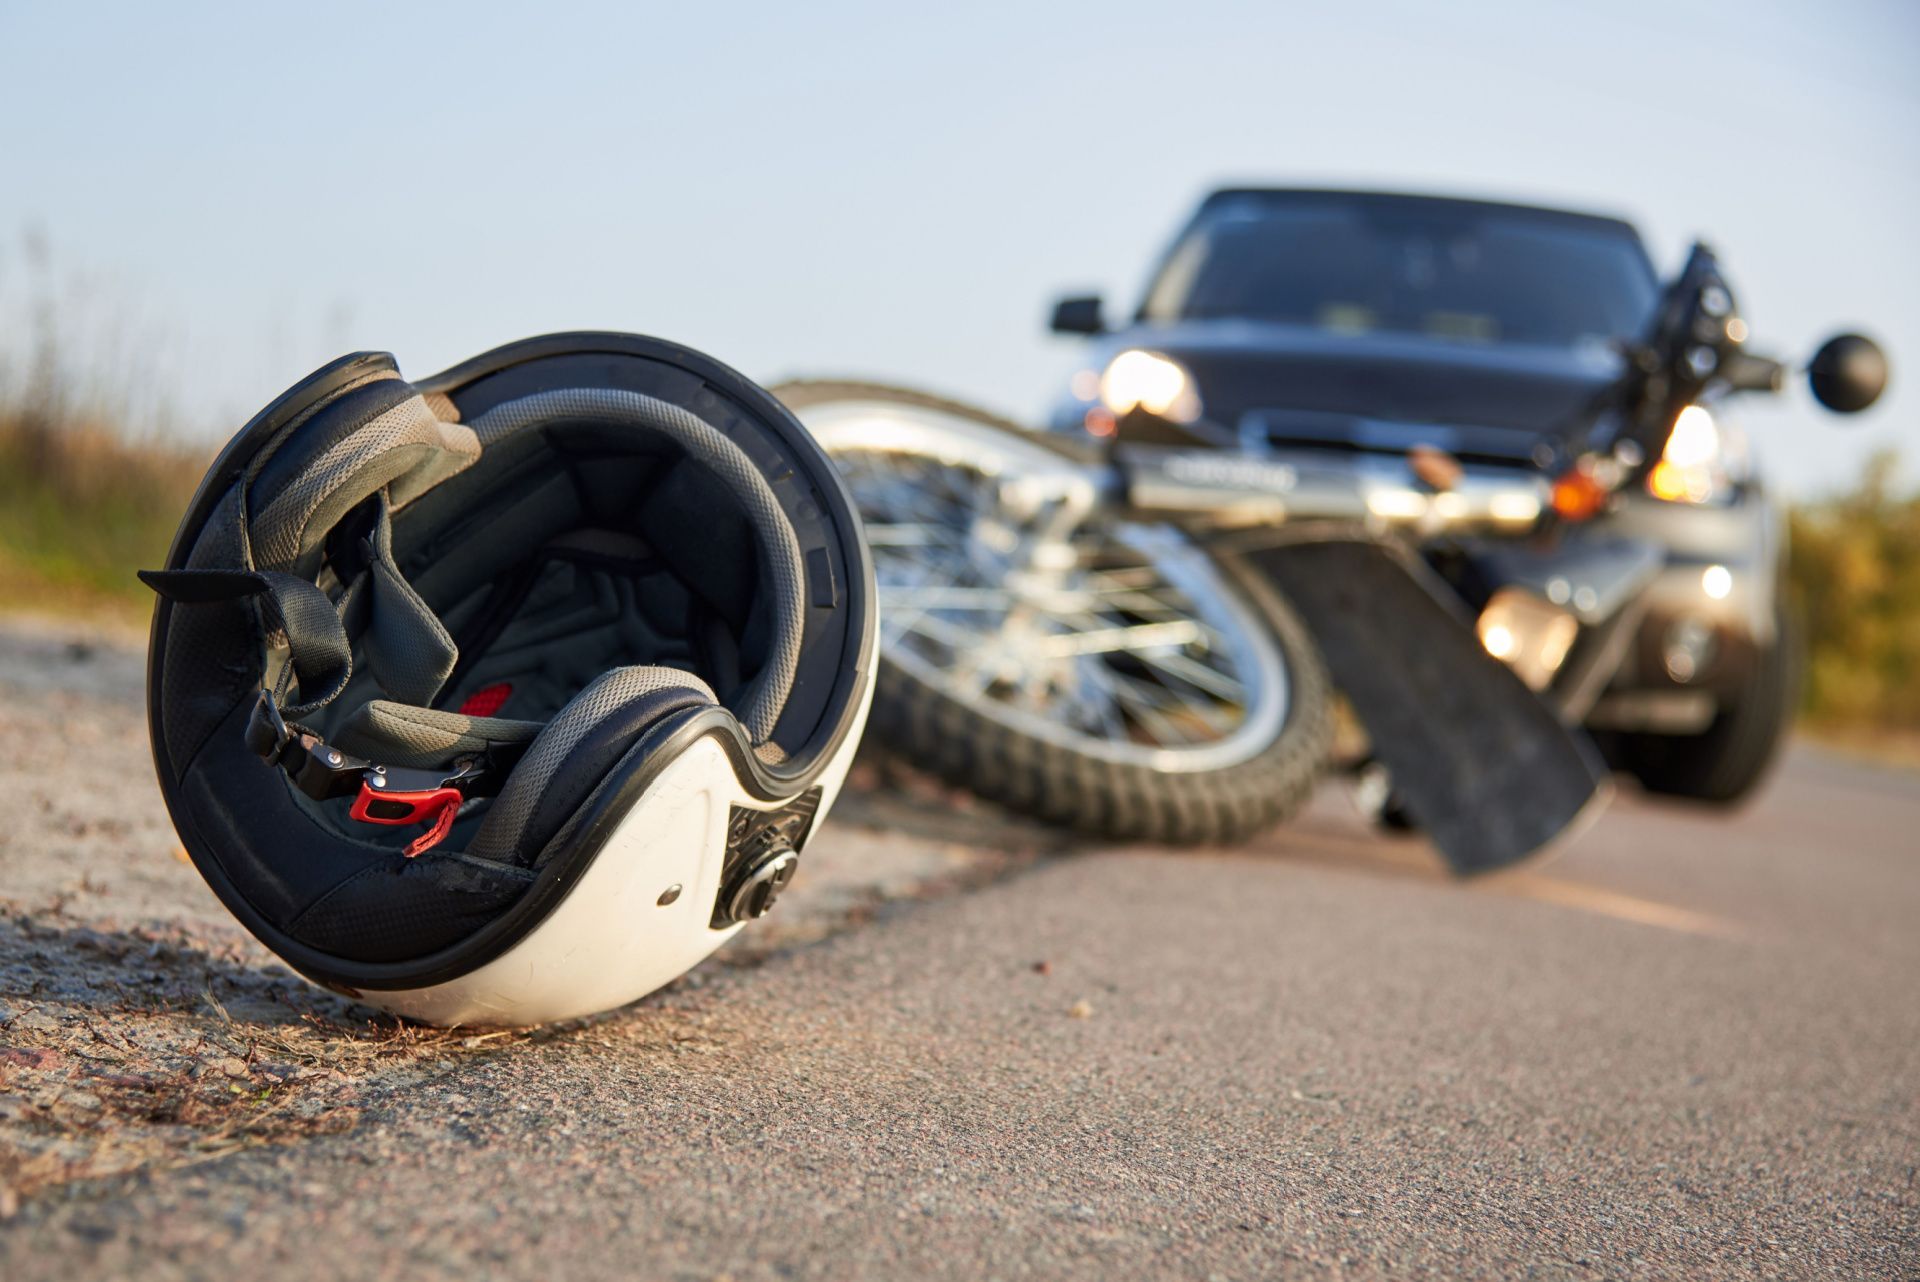 Motorcycle Accidents Law Service in Miami Beach, FL